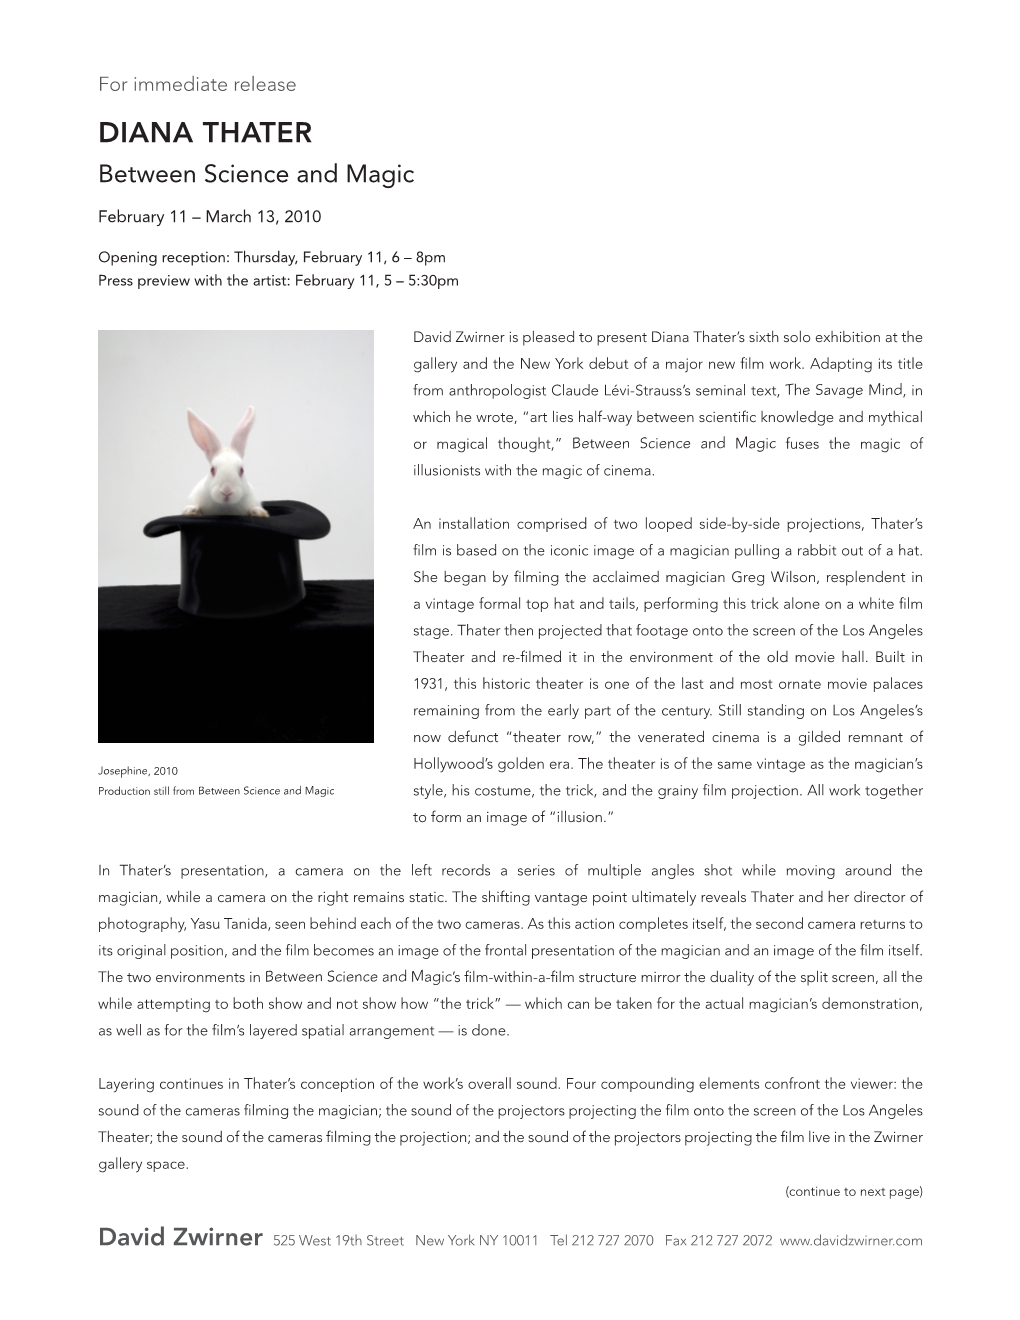 DIANA THATER Between Science and Magic